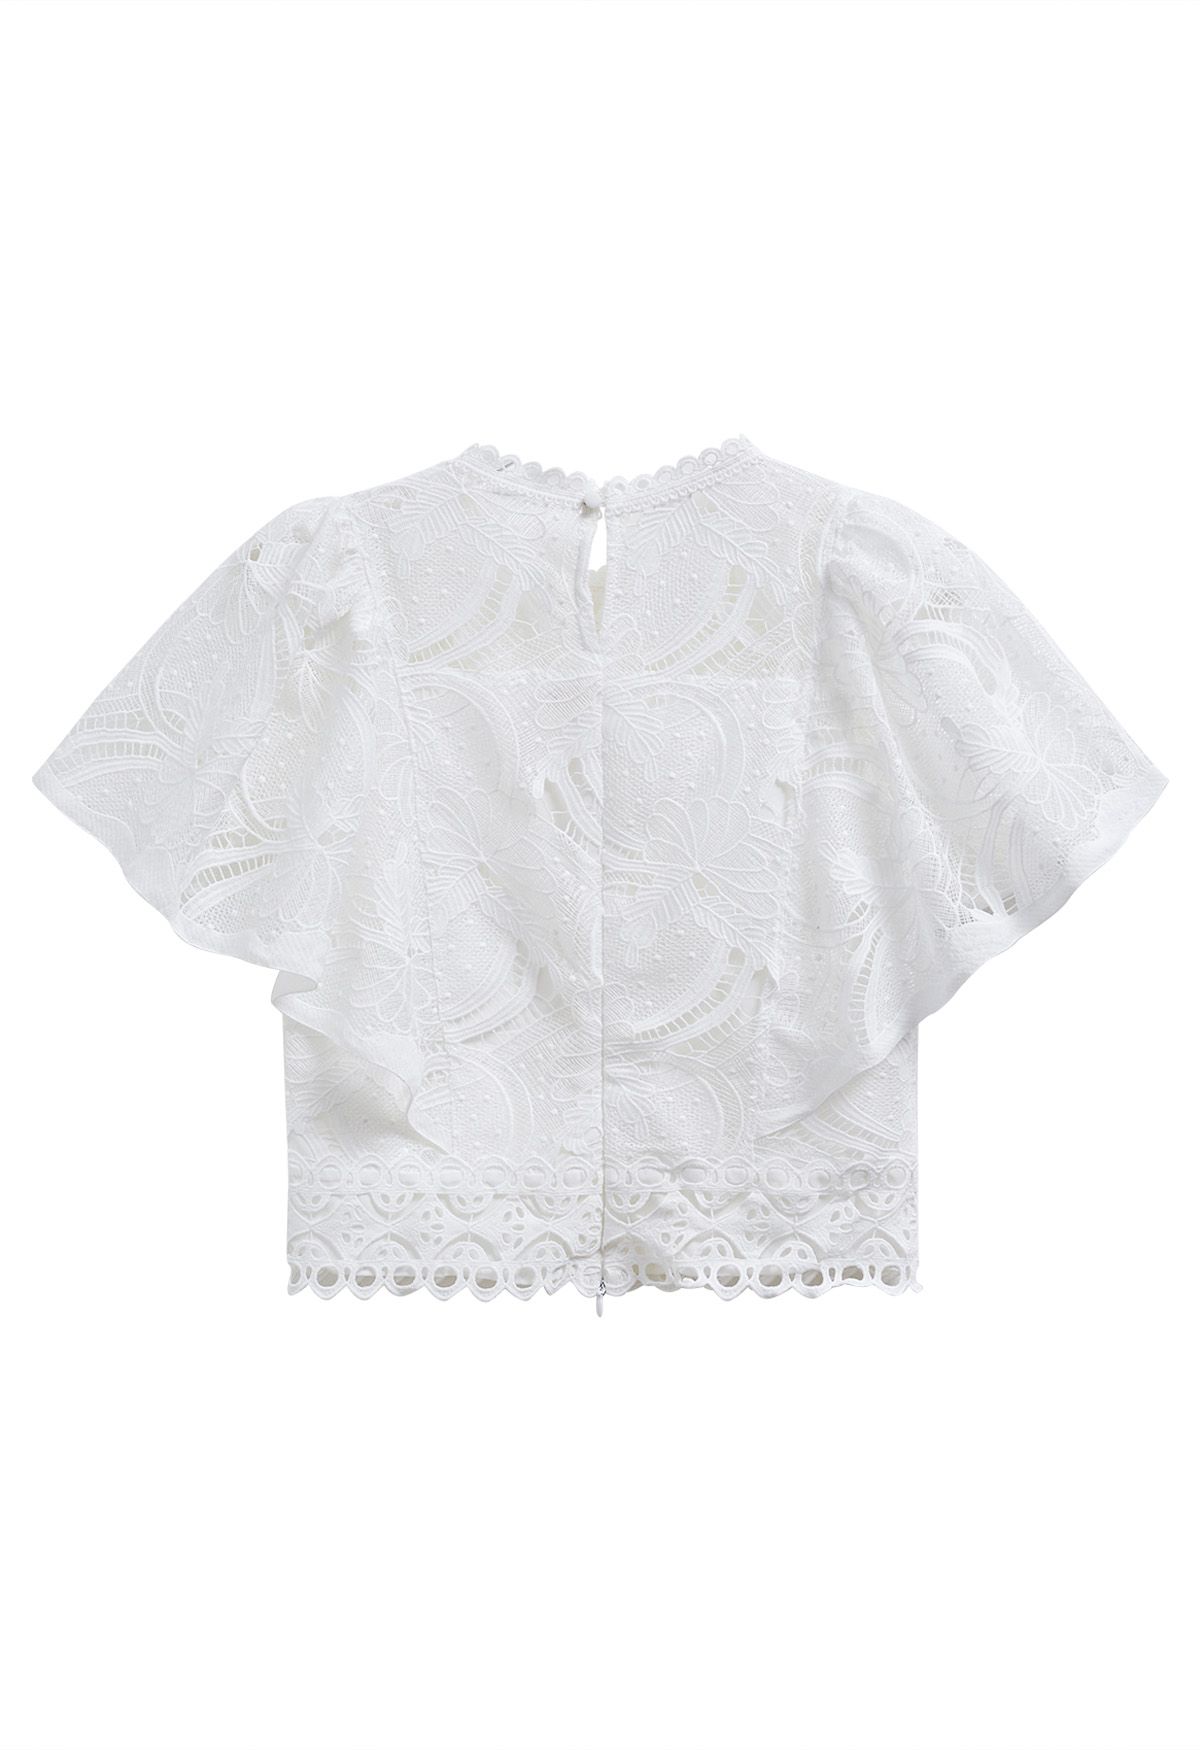 Leaves Cutwork Lace Flutter Sleeve Top in White